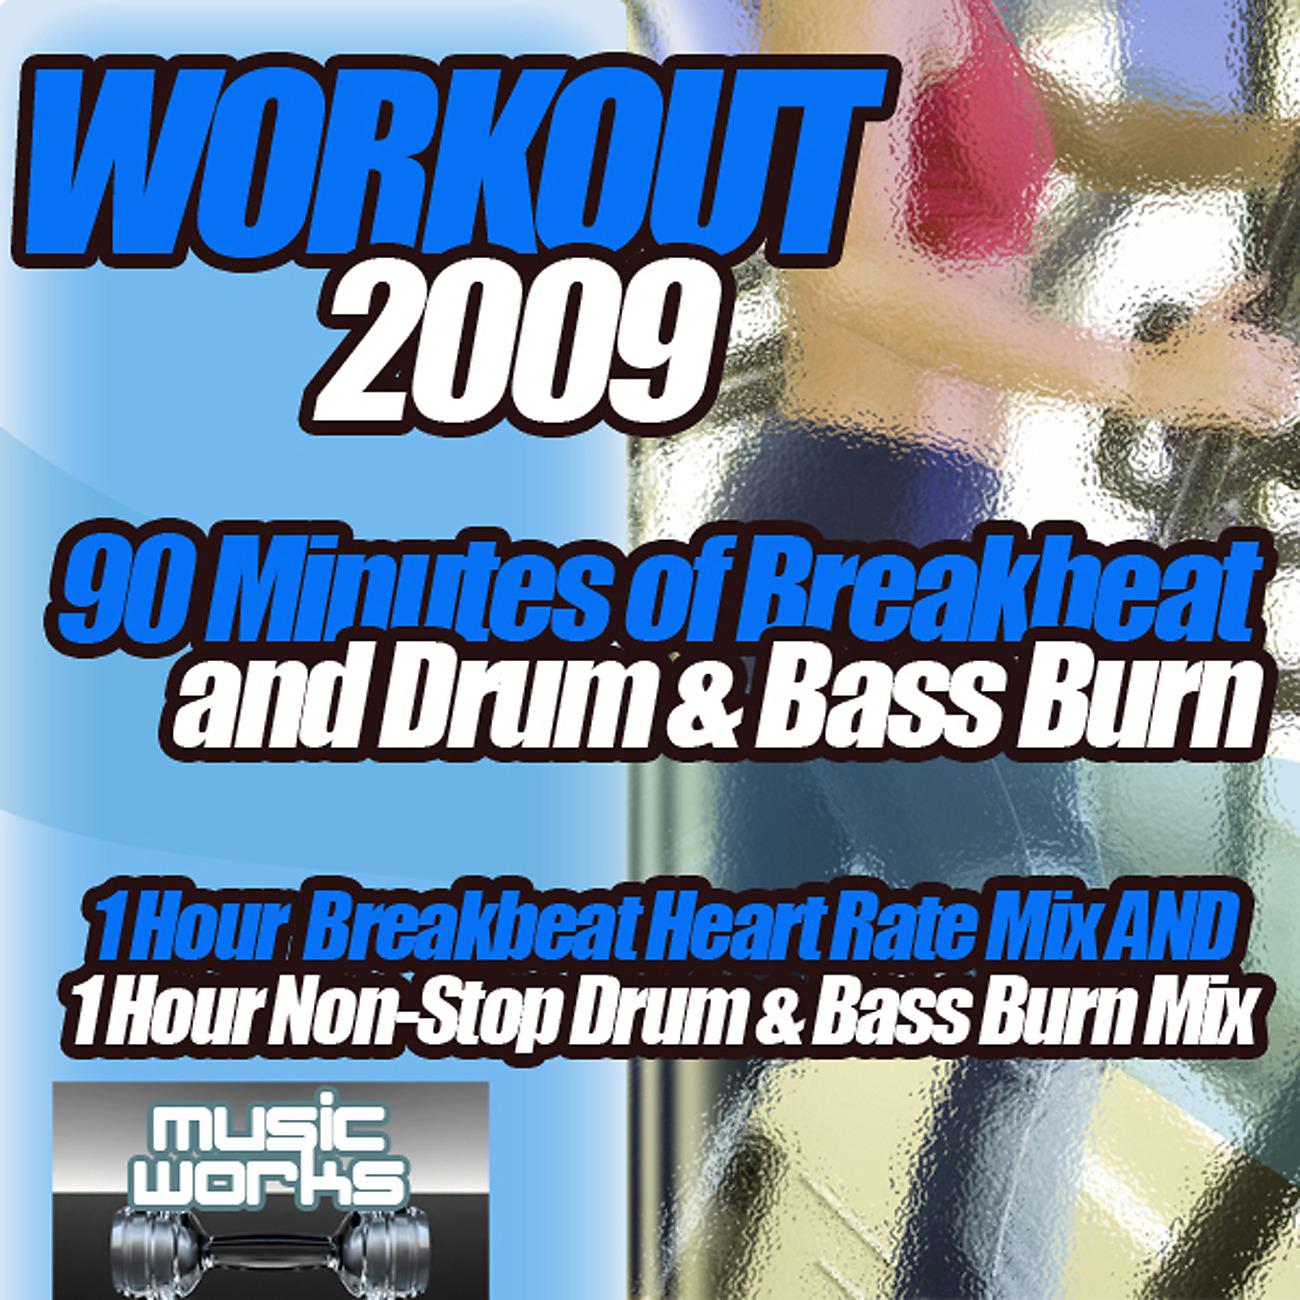 Постер альбома Workout 2009 - The Ultra Dance Breaks Break Beat Bass & Drum and Bass Pumping Cardio Fitness Gym Work Out Mix to Help Shape Up